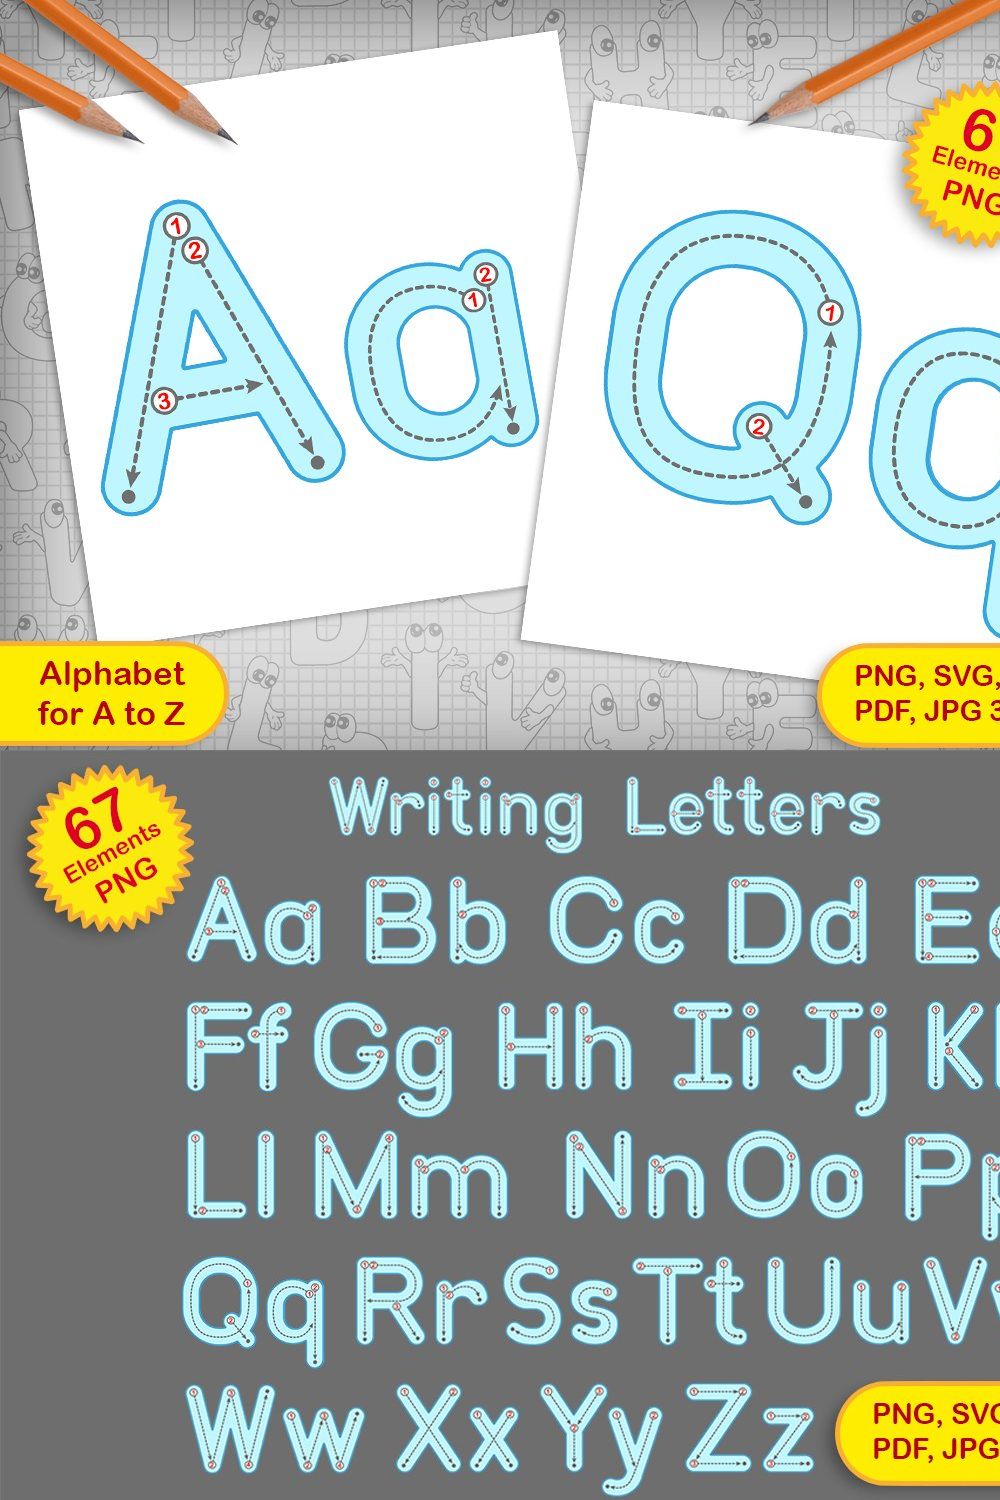 Writing letters font pinterest preview image.